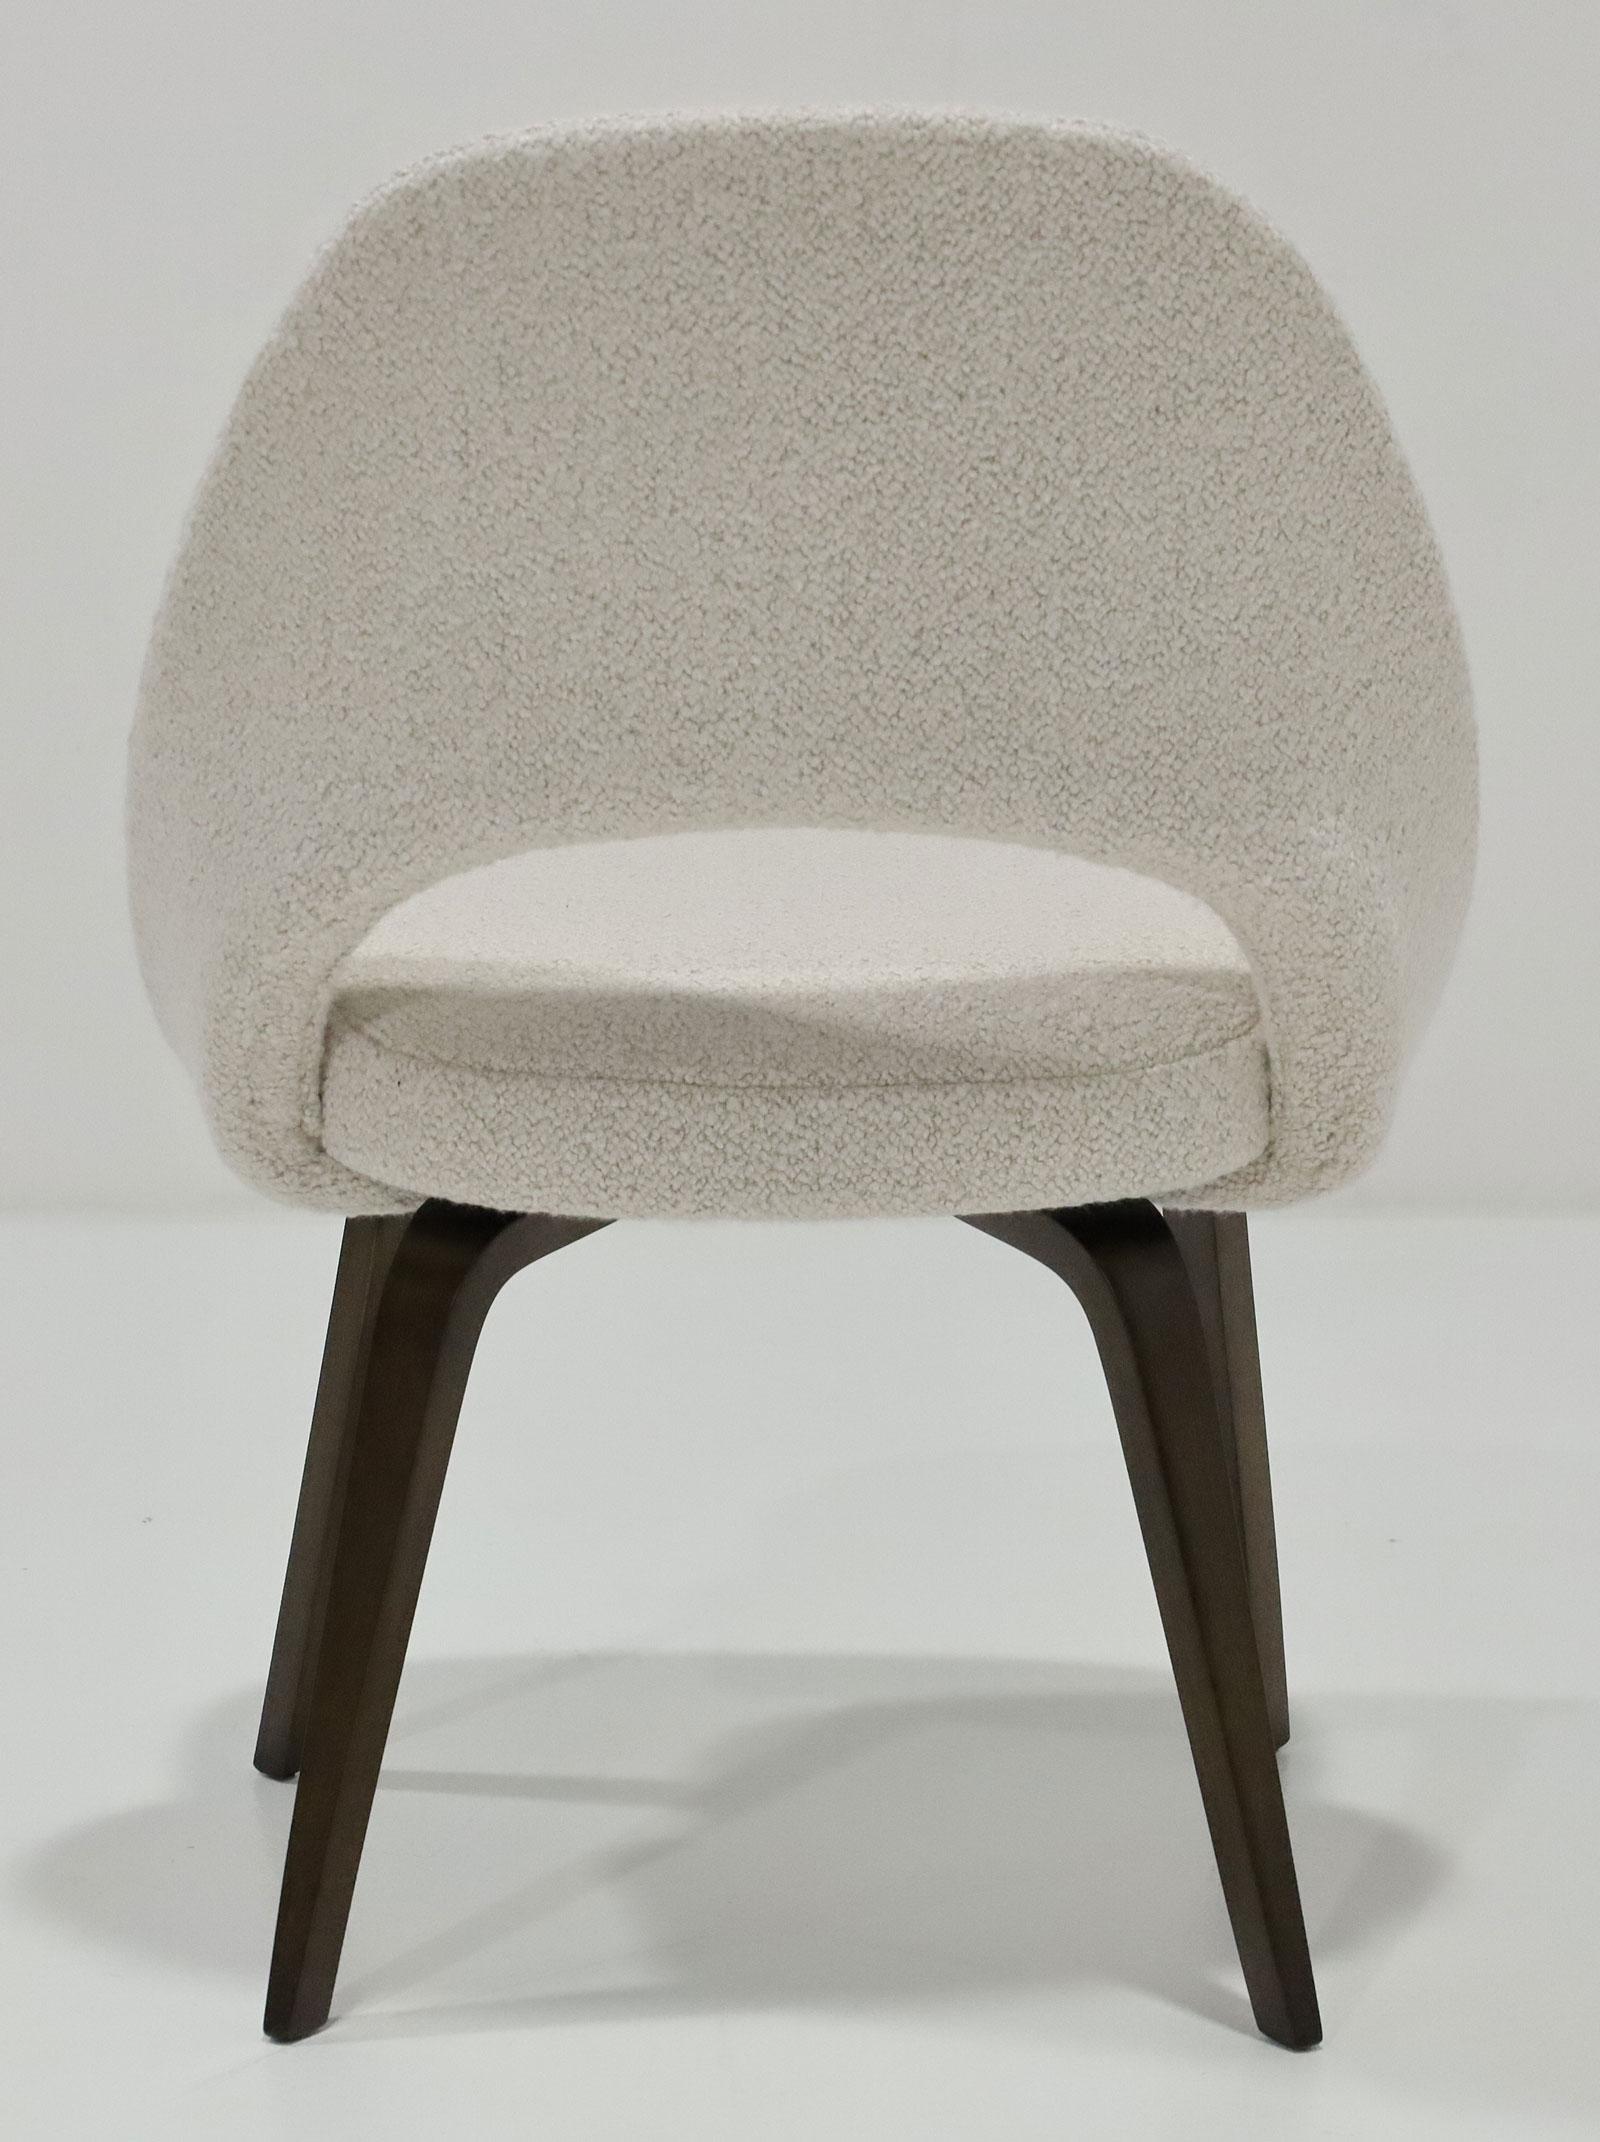 Upholstery Eero Saarinen for Knoll Armless Executive Chair with Walnut Legs and Boucle